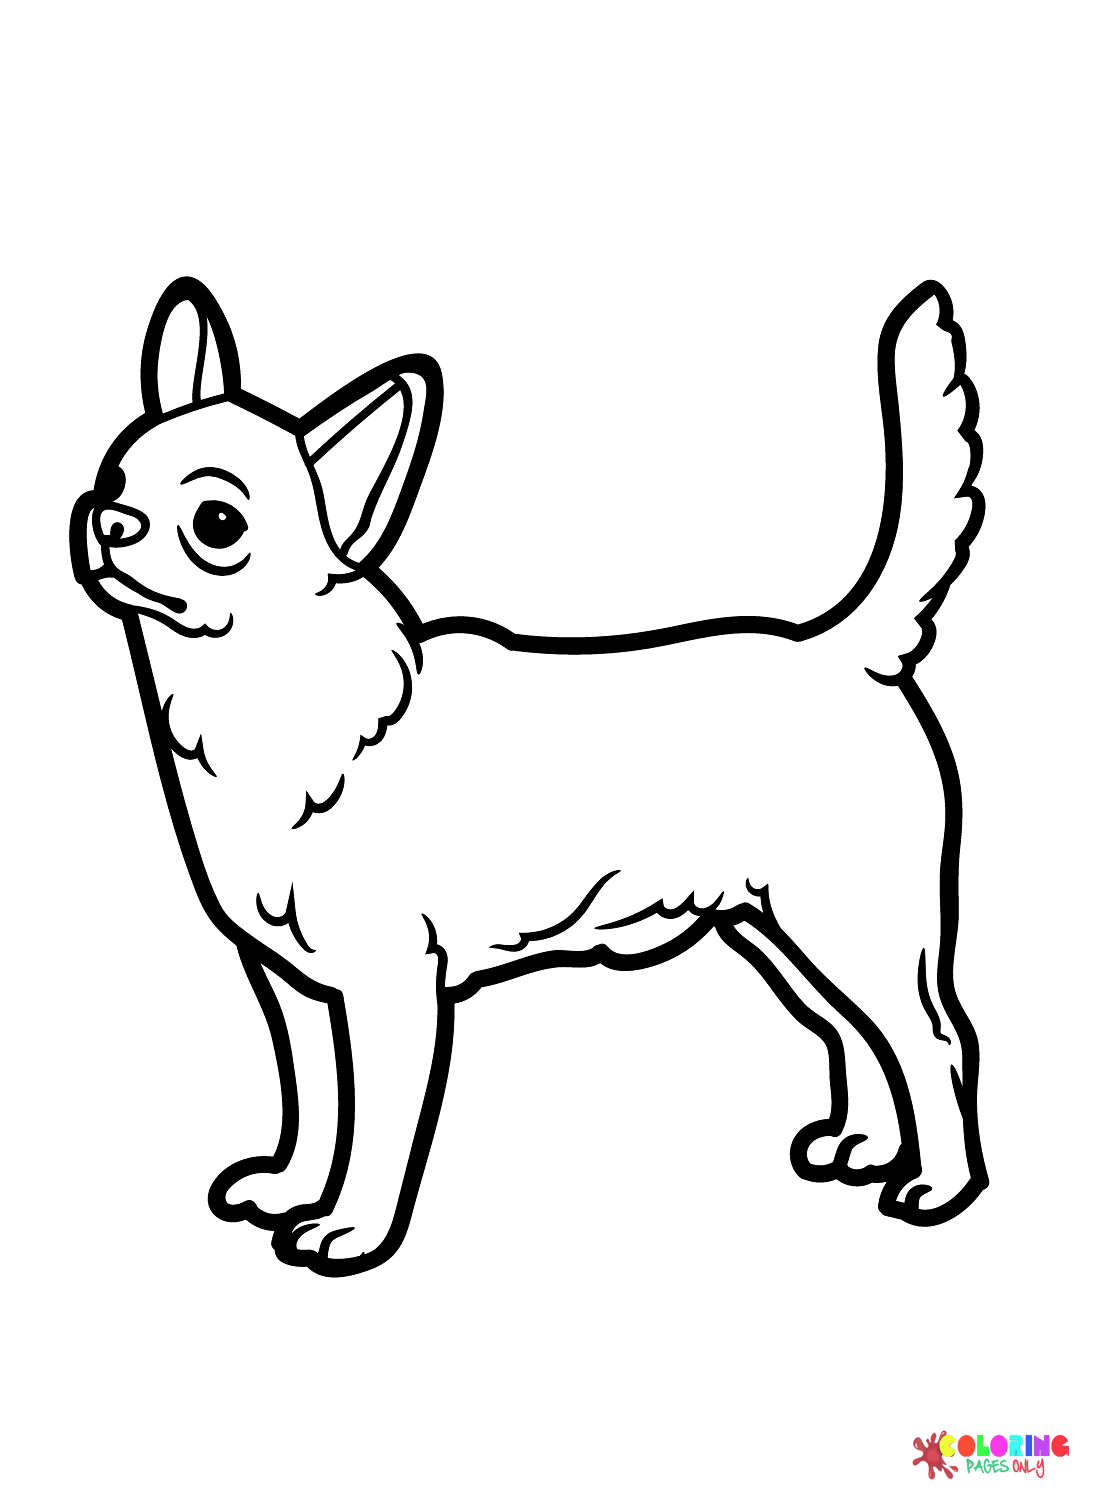 Chihuahua Dog Coloring Pages - Free Printable Coloring Pages